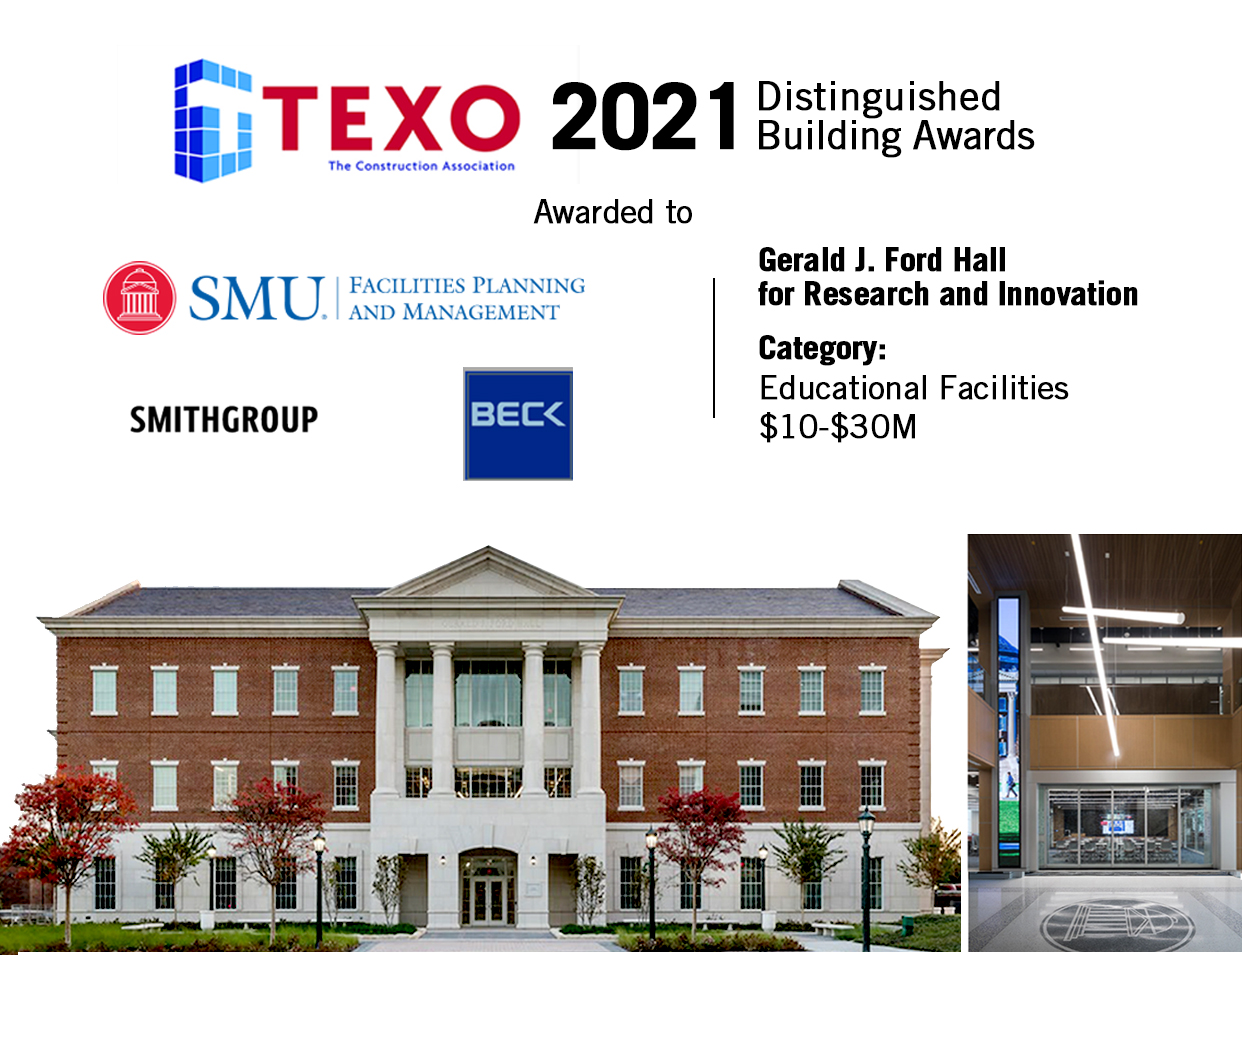 TEXO 2021 Award for Ford Hall